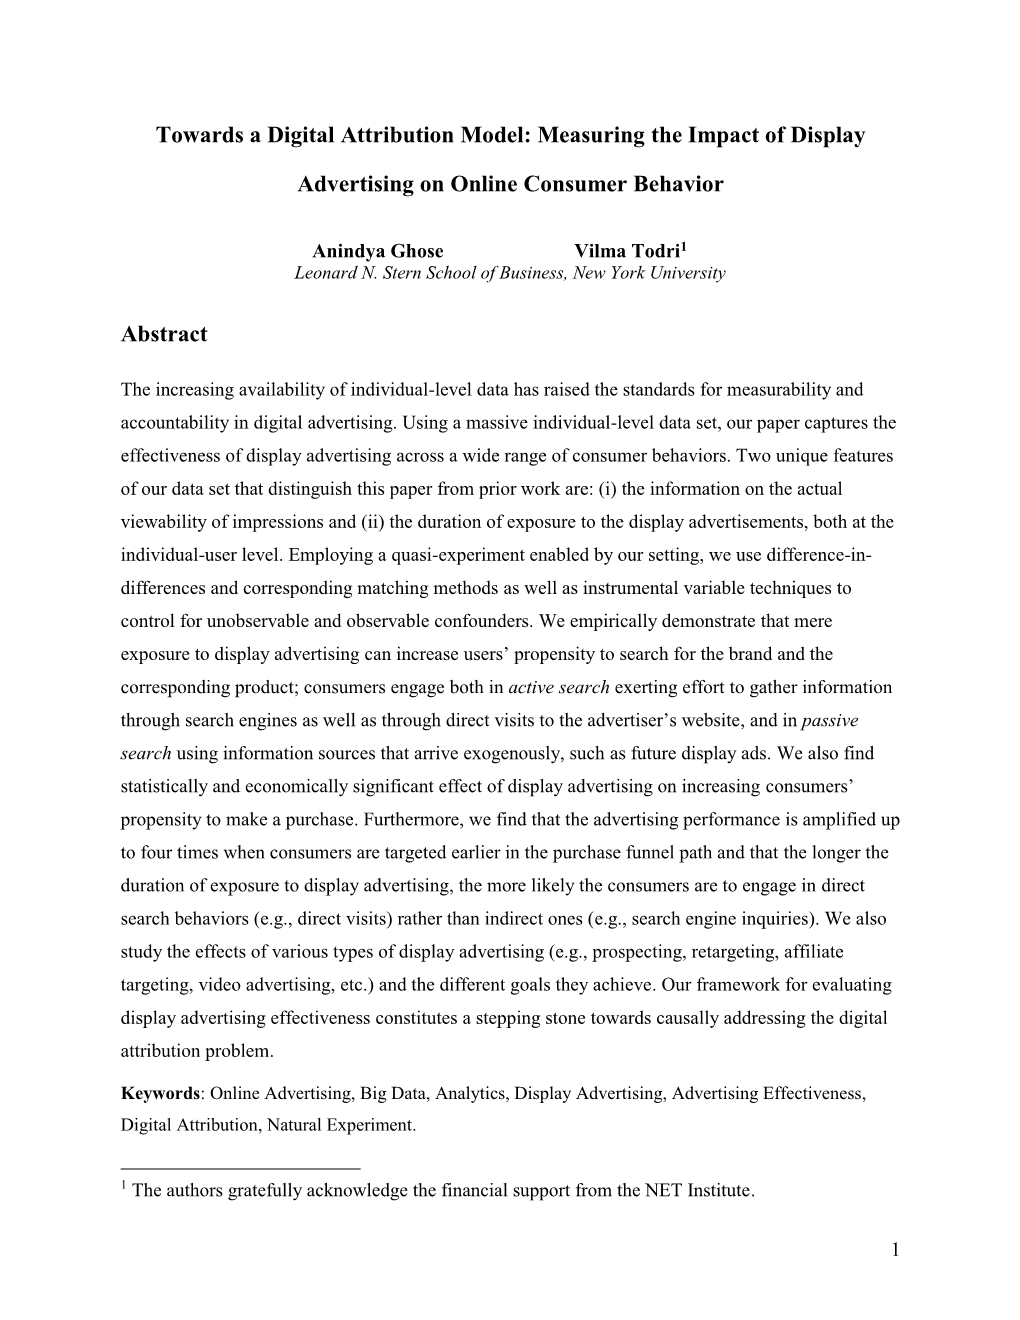 Towards a Digital Attribution Model: Measuring the Impact of Display